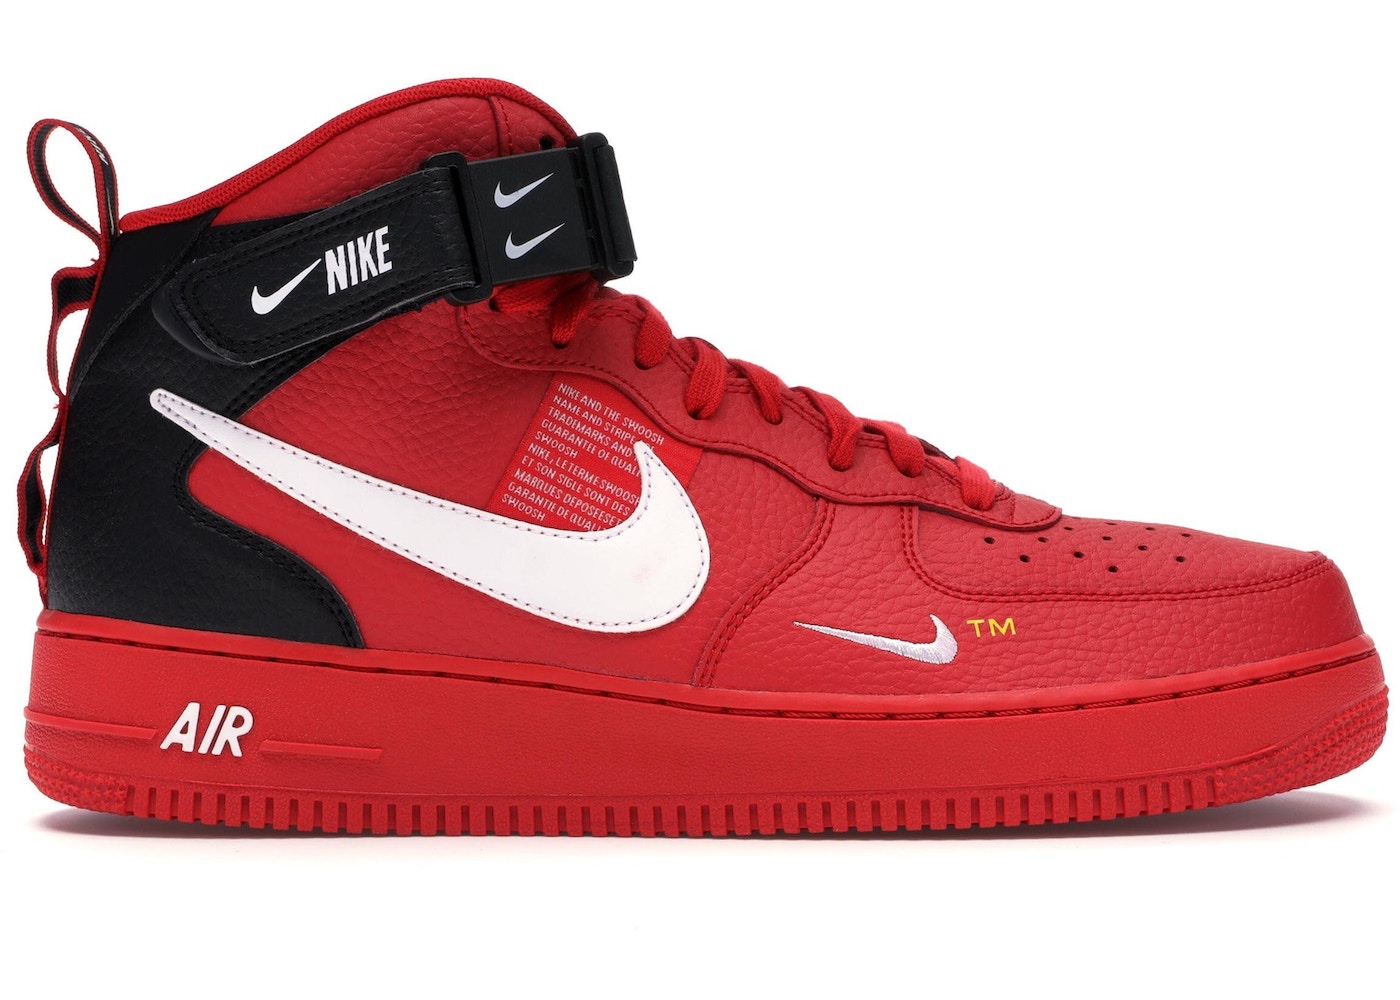 Nike Air Force 1 Mid Utility University Red - 804609-605